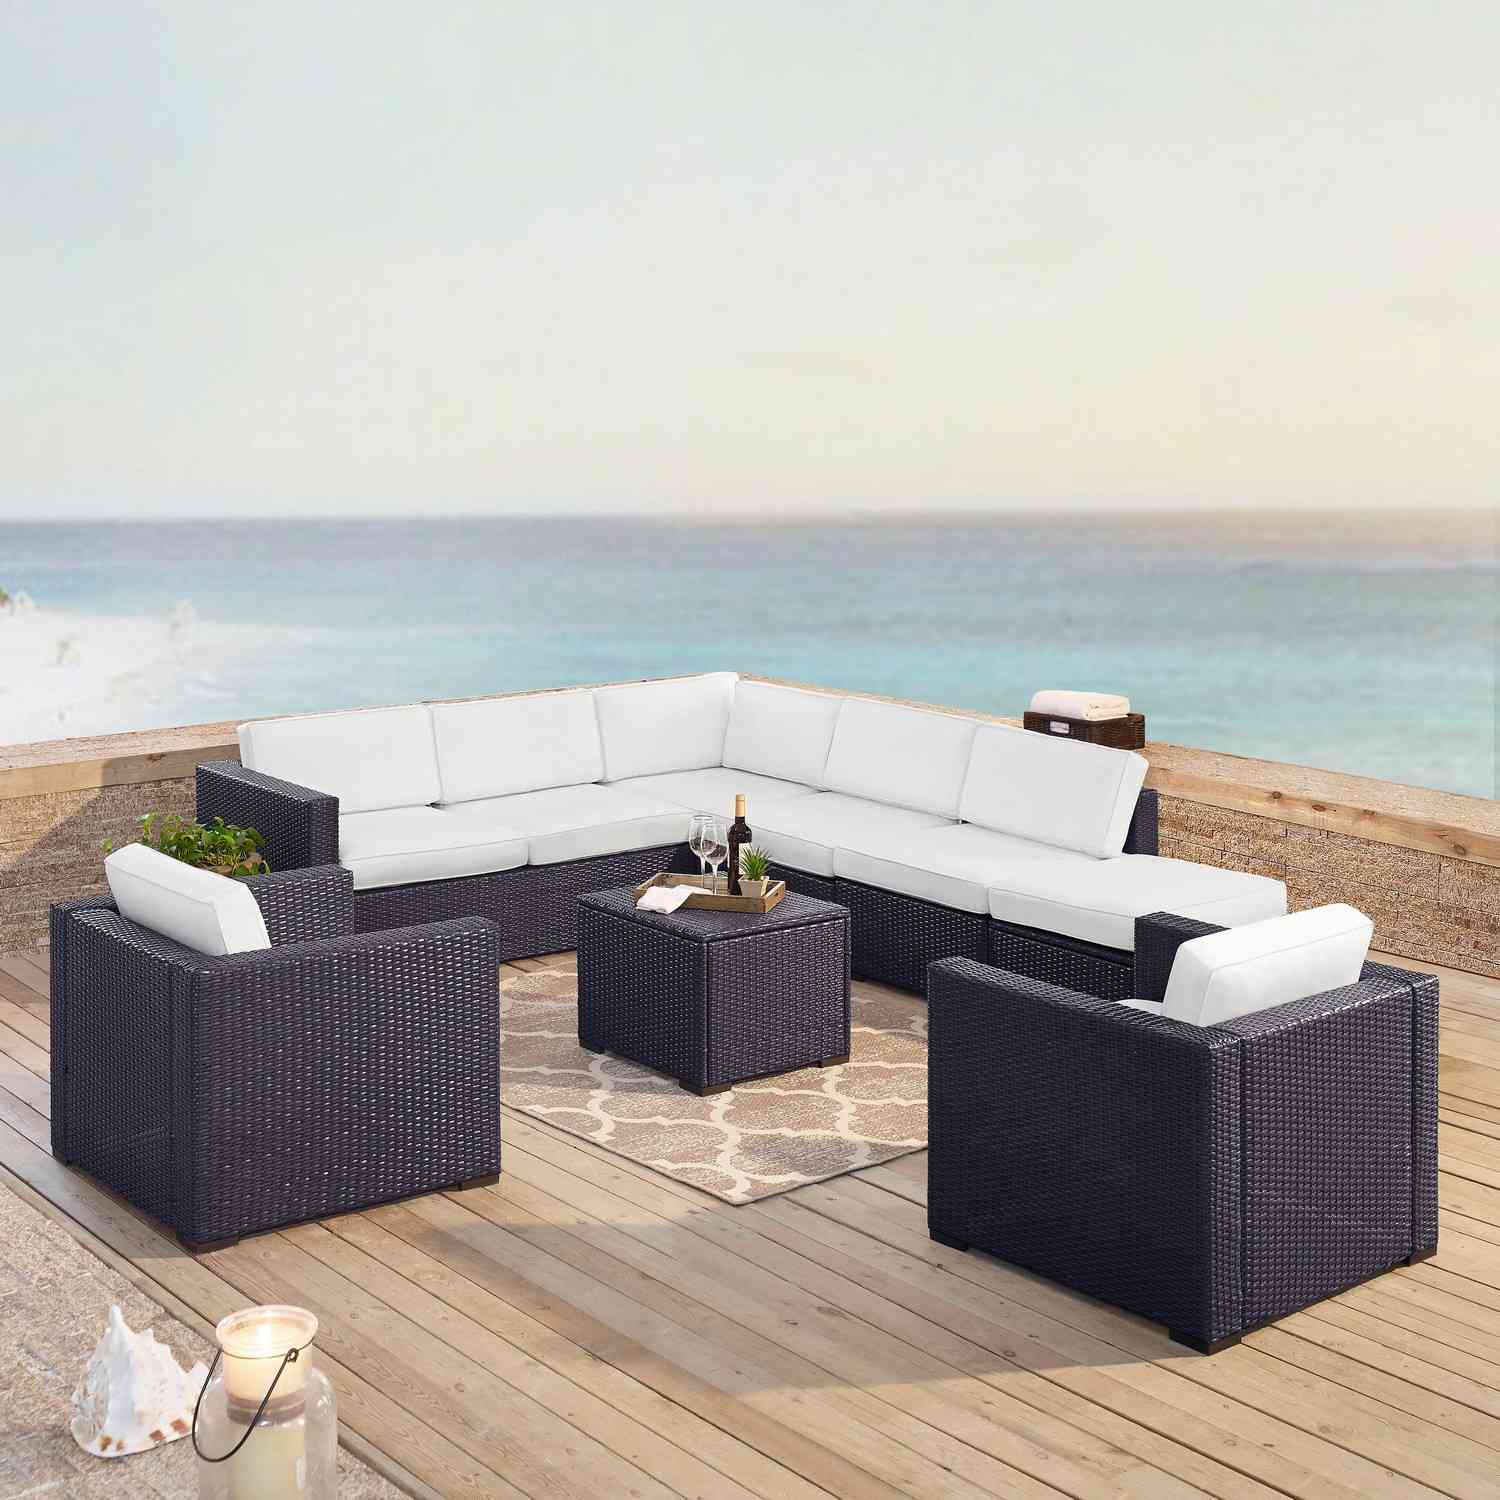 Crosley Biscayne 7-PC Outdoor Wicker Sectional Set - 2 Loveseats, 2 Arm Chairs, Armless Chair, Coffee Table, Ottoman - White/Brown